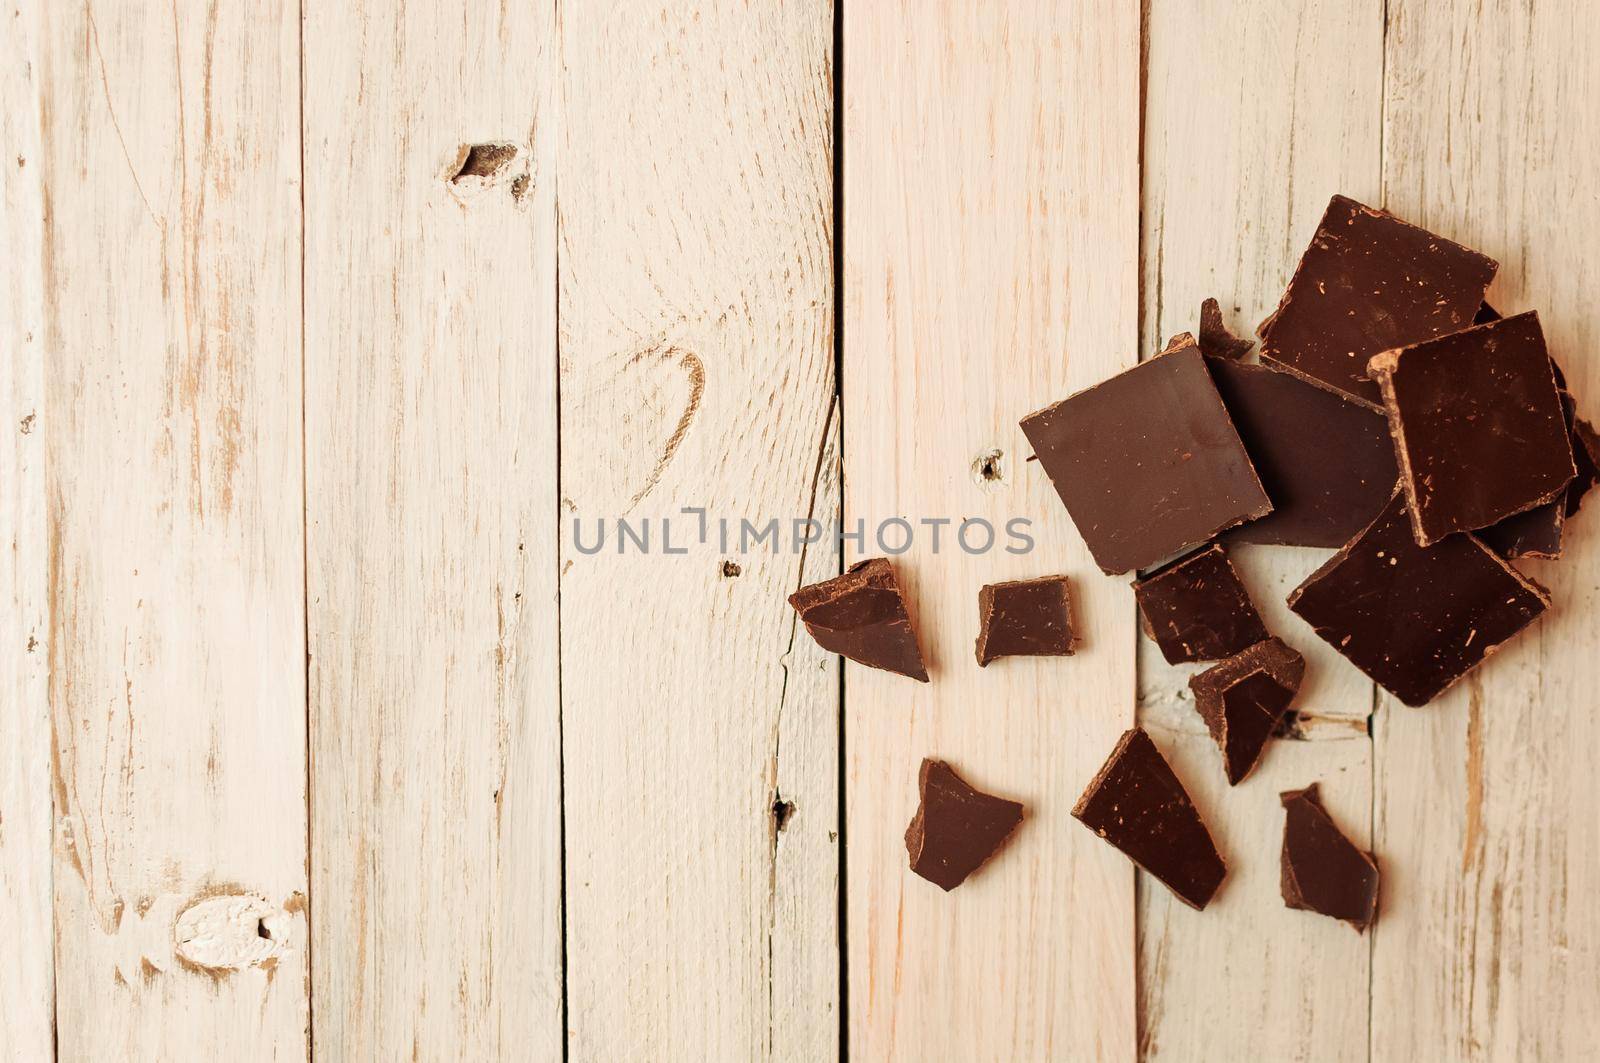 dark chocolate without sugar and gluten free for diabetics and allergics. Black chocolate broken into pieces lies on a white table in a rustic style. Copy space.